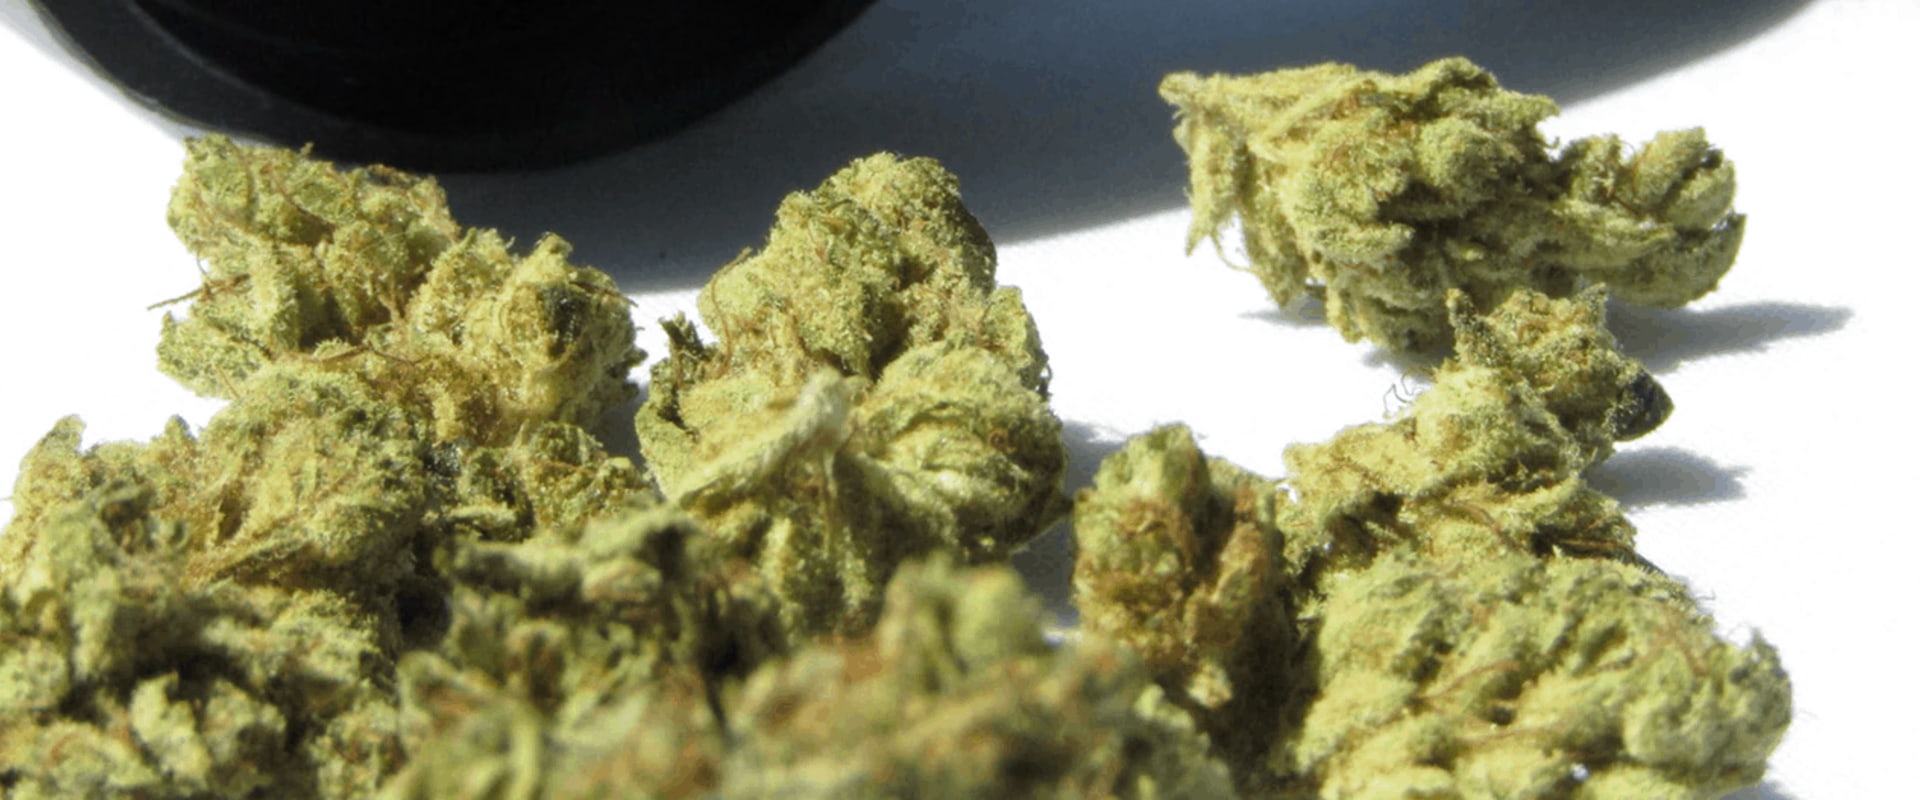 Is there a difference between marijuana and thc-o?